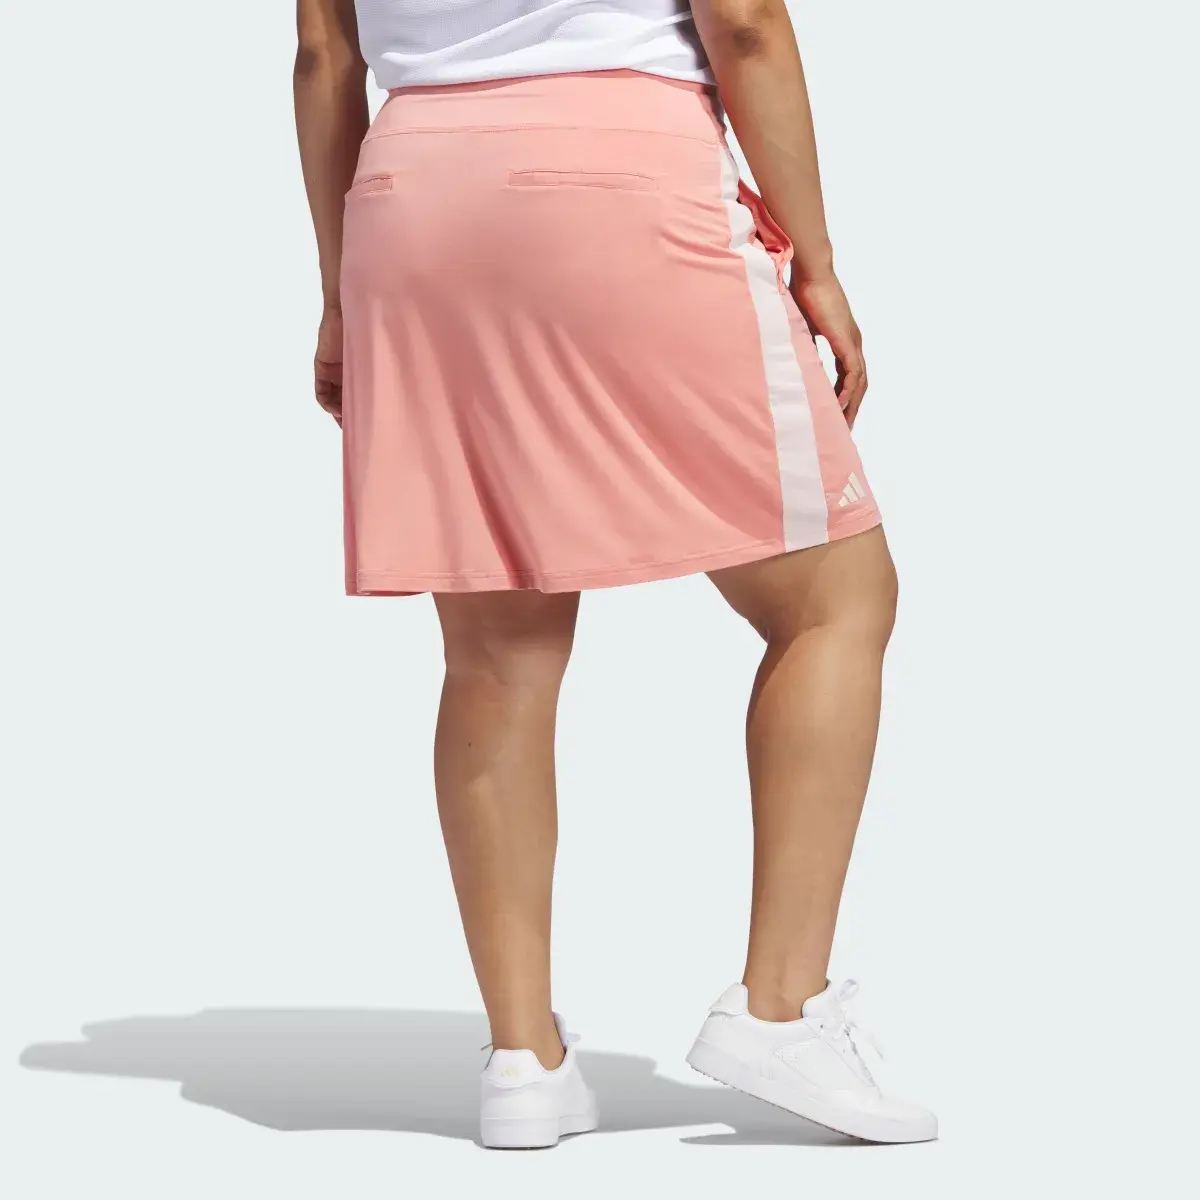 Adidas Made With Nature Golf Skort (Plus Size). 2